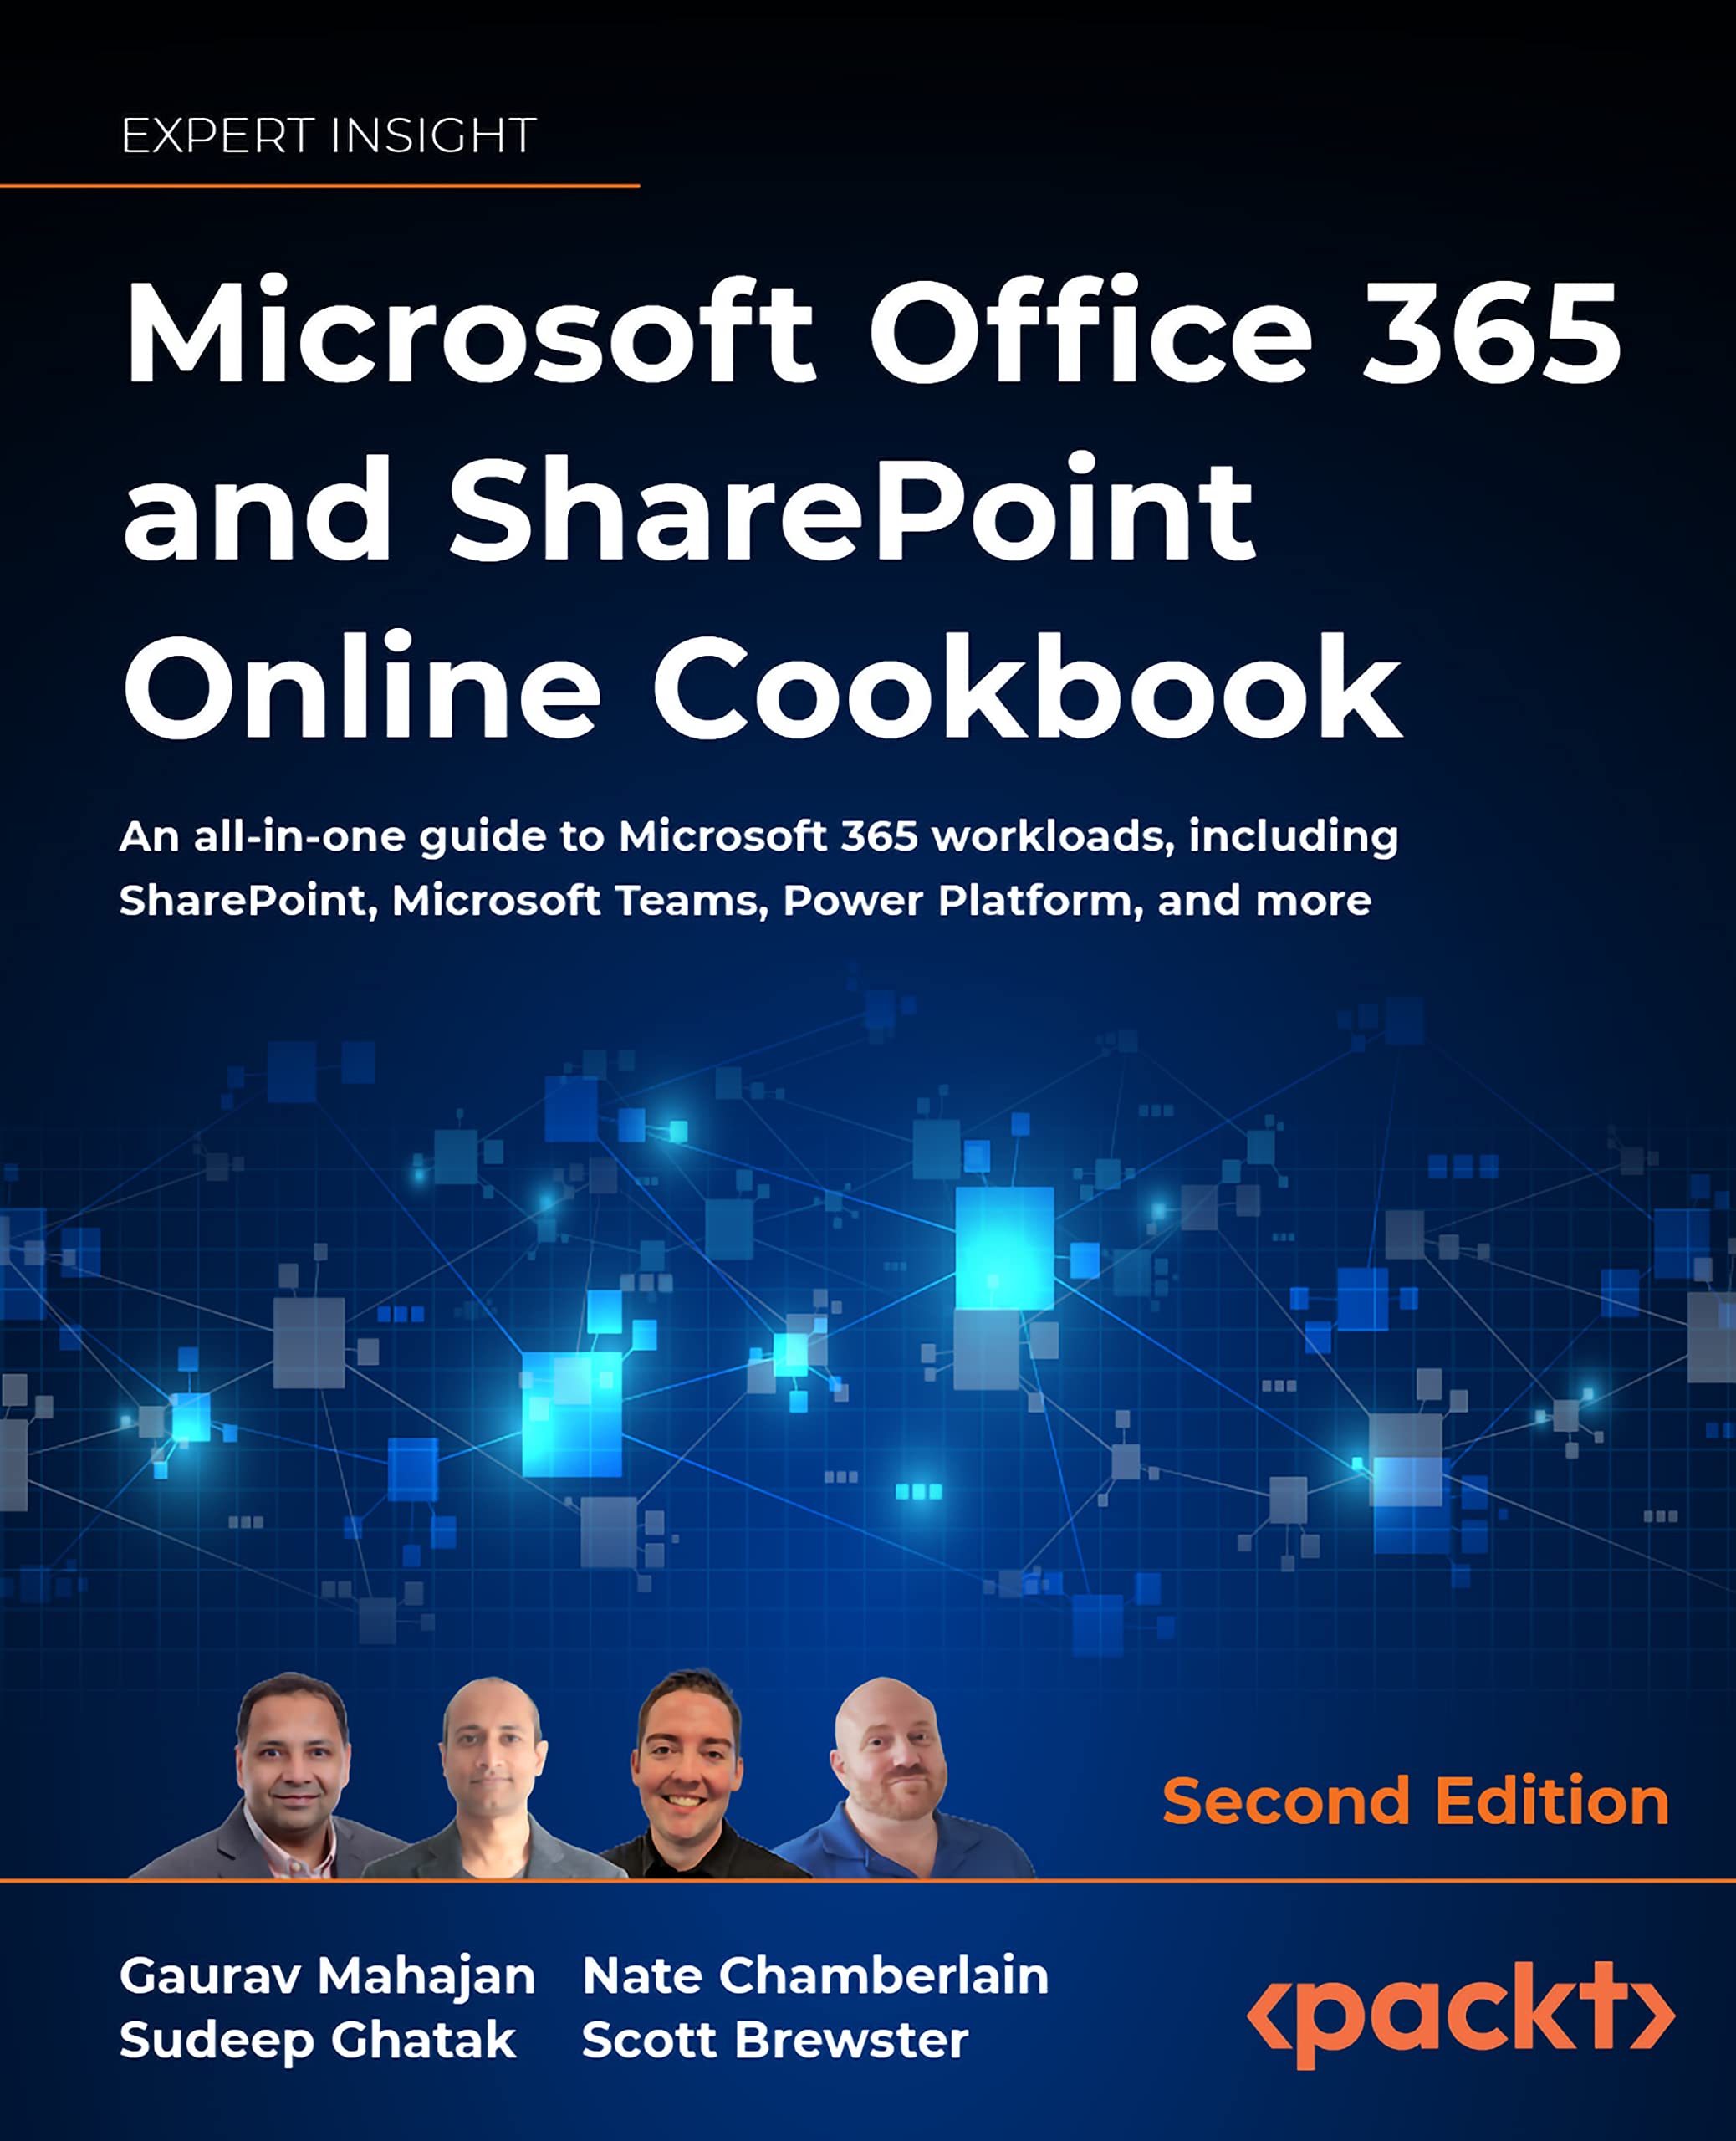 Microsoft Office 365 and SharePoint Online Cookbook: An all-in-one guide to Microsoft 365 workloads, including SharePoint, Microsoft Teams, Power Platform, and more, 2nd Edition